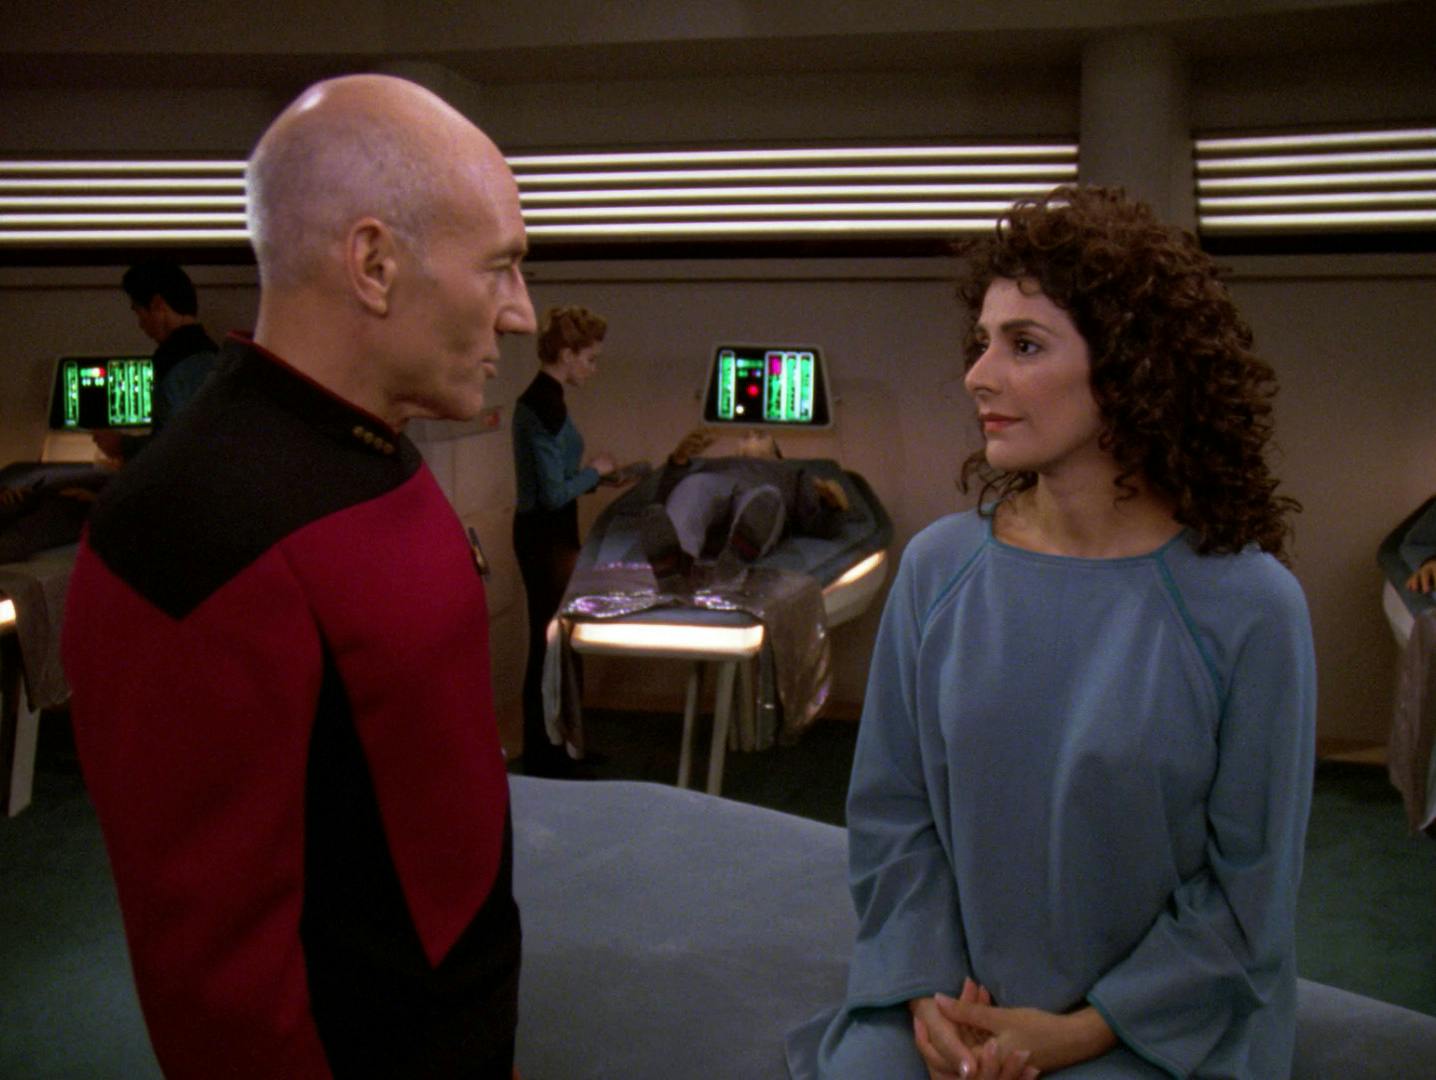 Picard checks in on Deanna Troi in Sickbay following her ordeal as posing as a Tal Shiar on a Romulan warbird in 'Face of the Enemy'